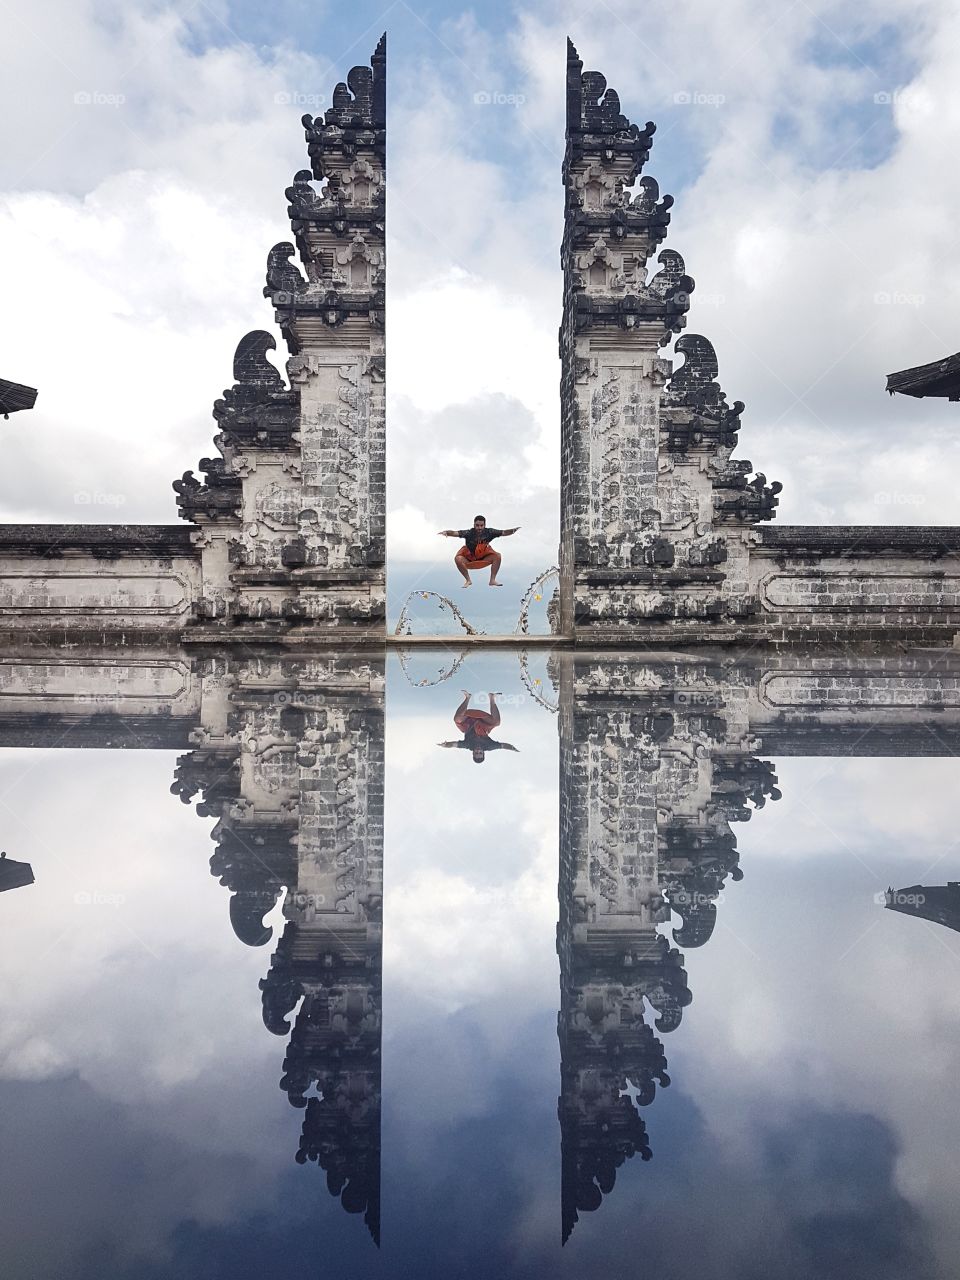 High jump over Heaven's door, performed wearing the traditional Sarong!  Lempuyang temple, Bali, Indonesia. Reaching this place on a volcanic mountain is an adventure itself!